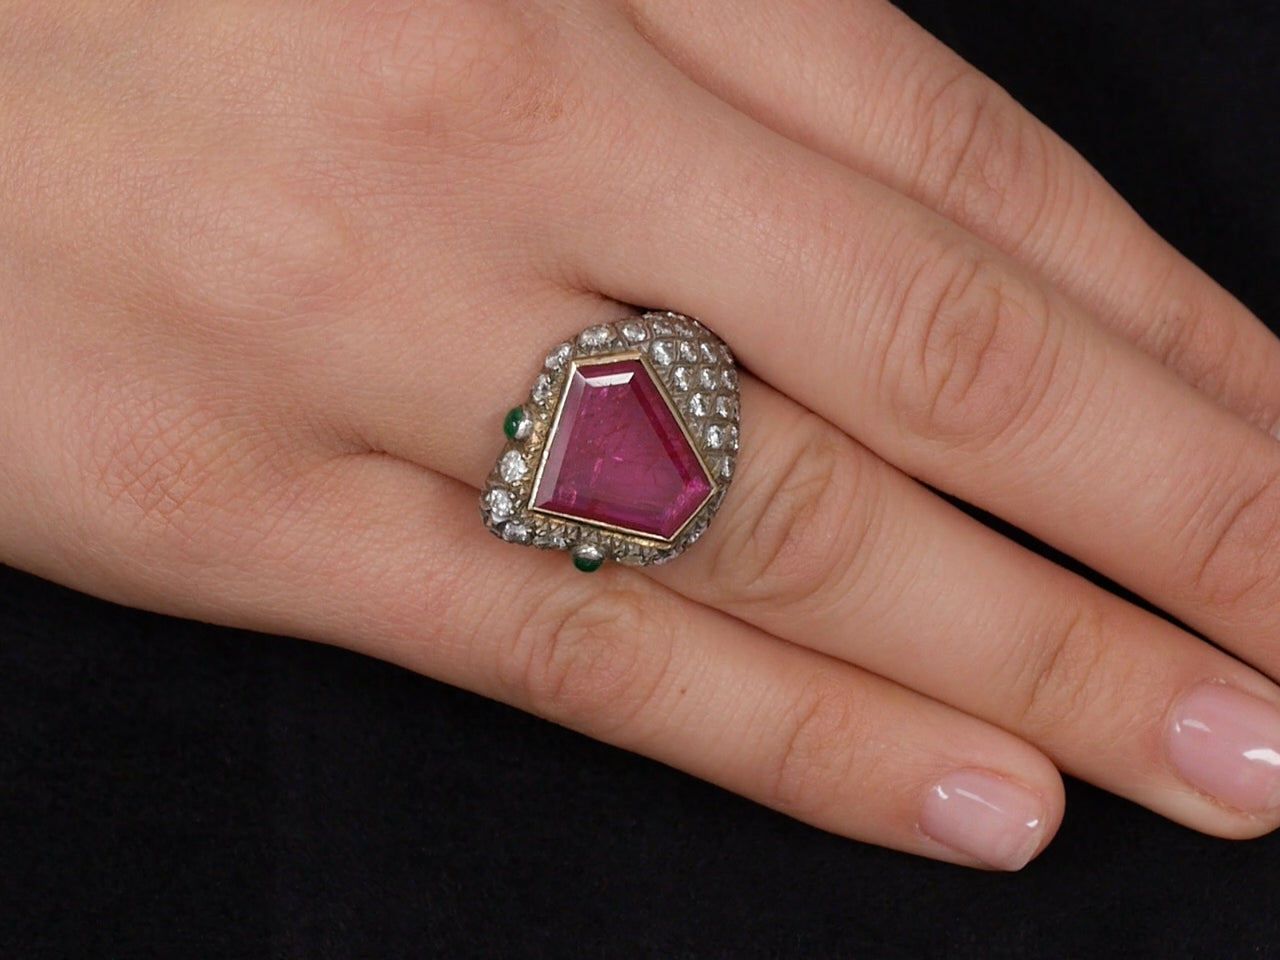 Rubellite, Diamond and Emerald Snake Ring in Silver over Gold